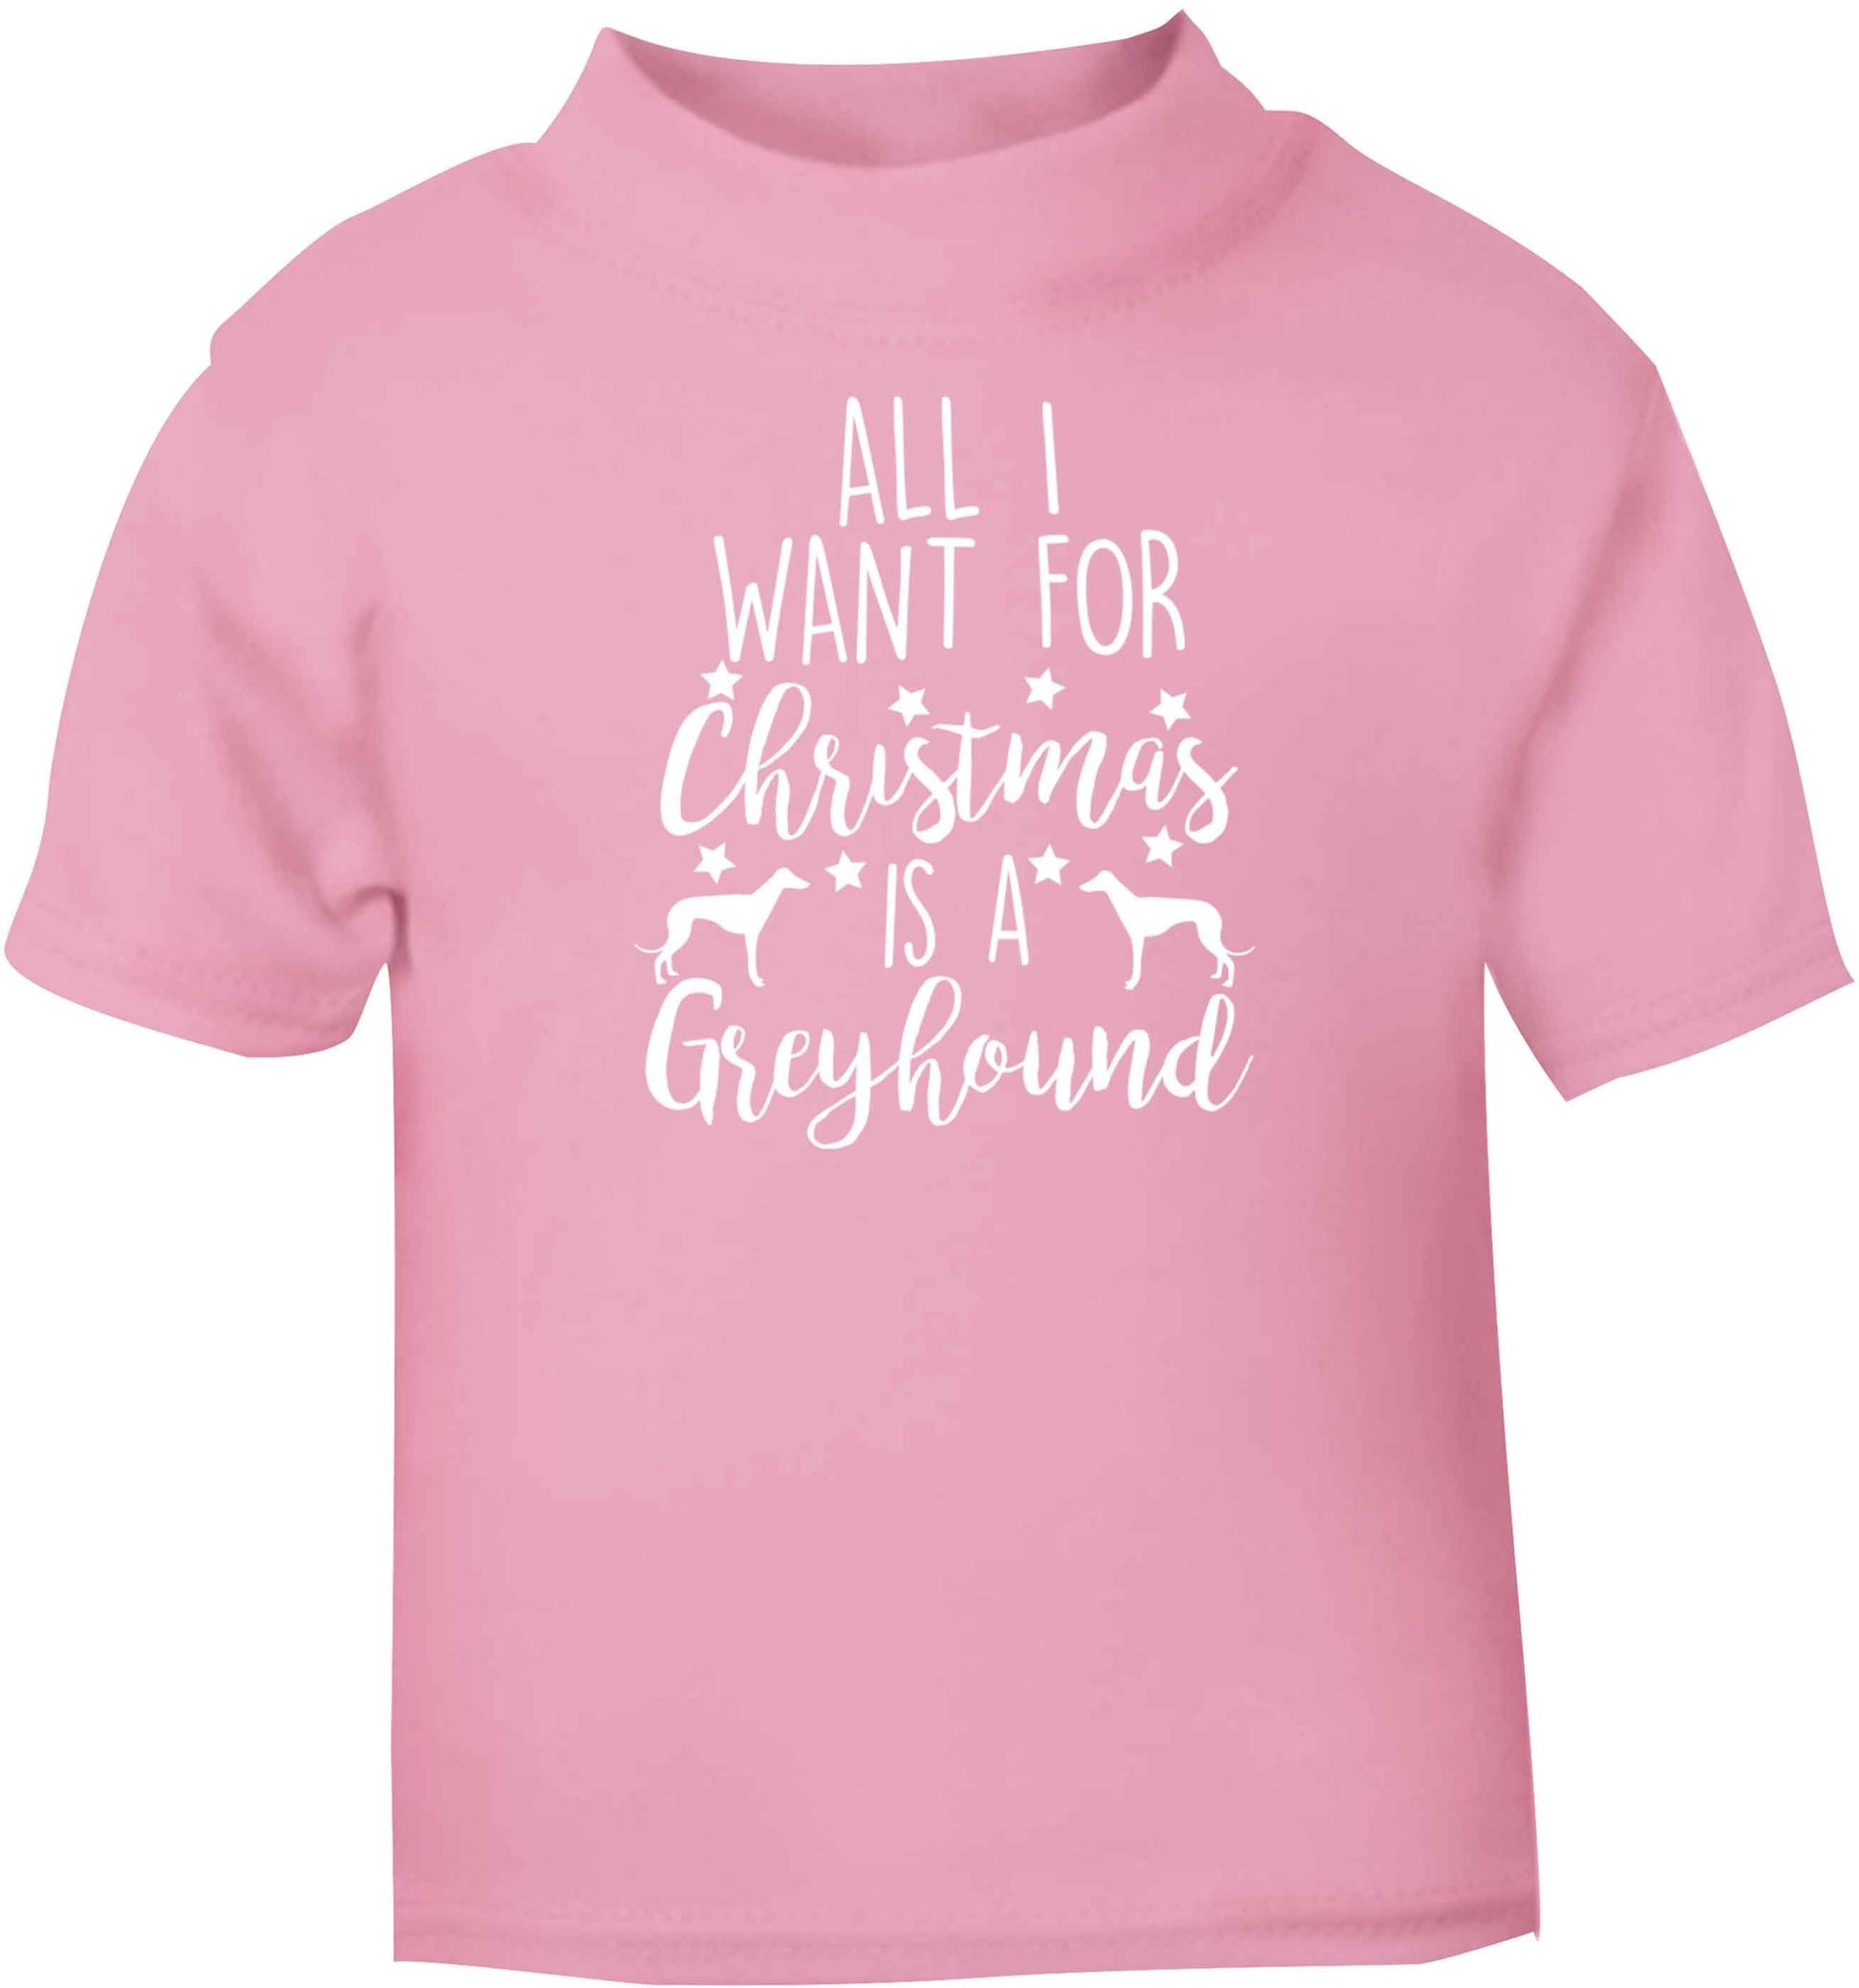 All I want for Christmas is a greyhound light pink baby toddler Tshirt 2 Years